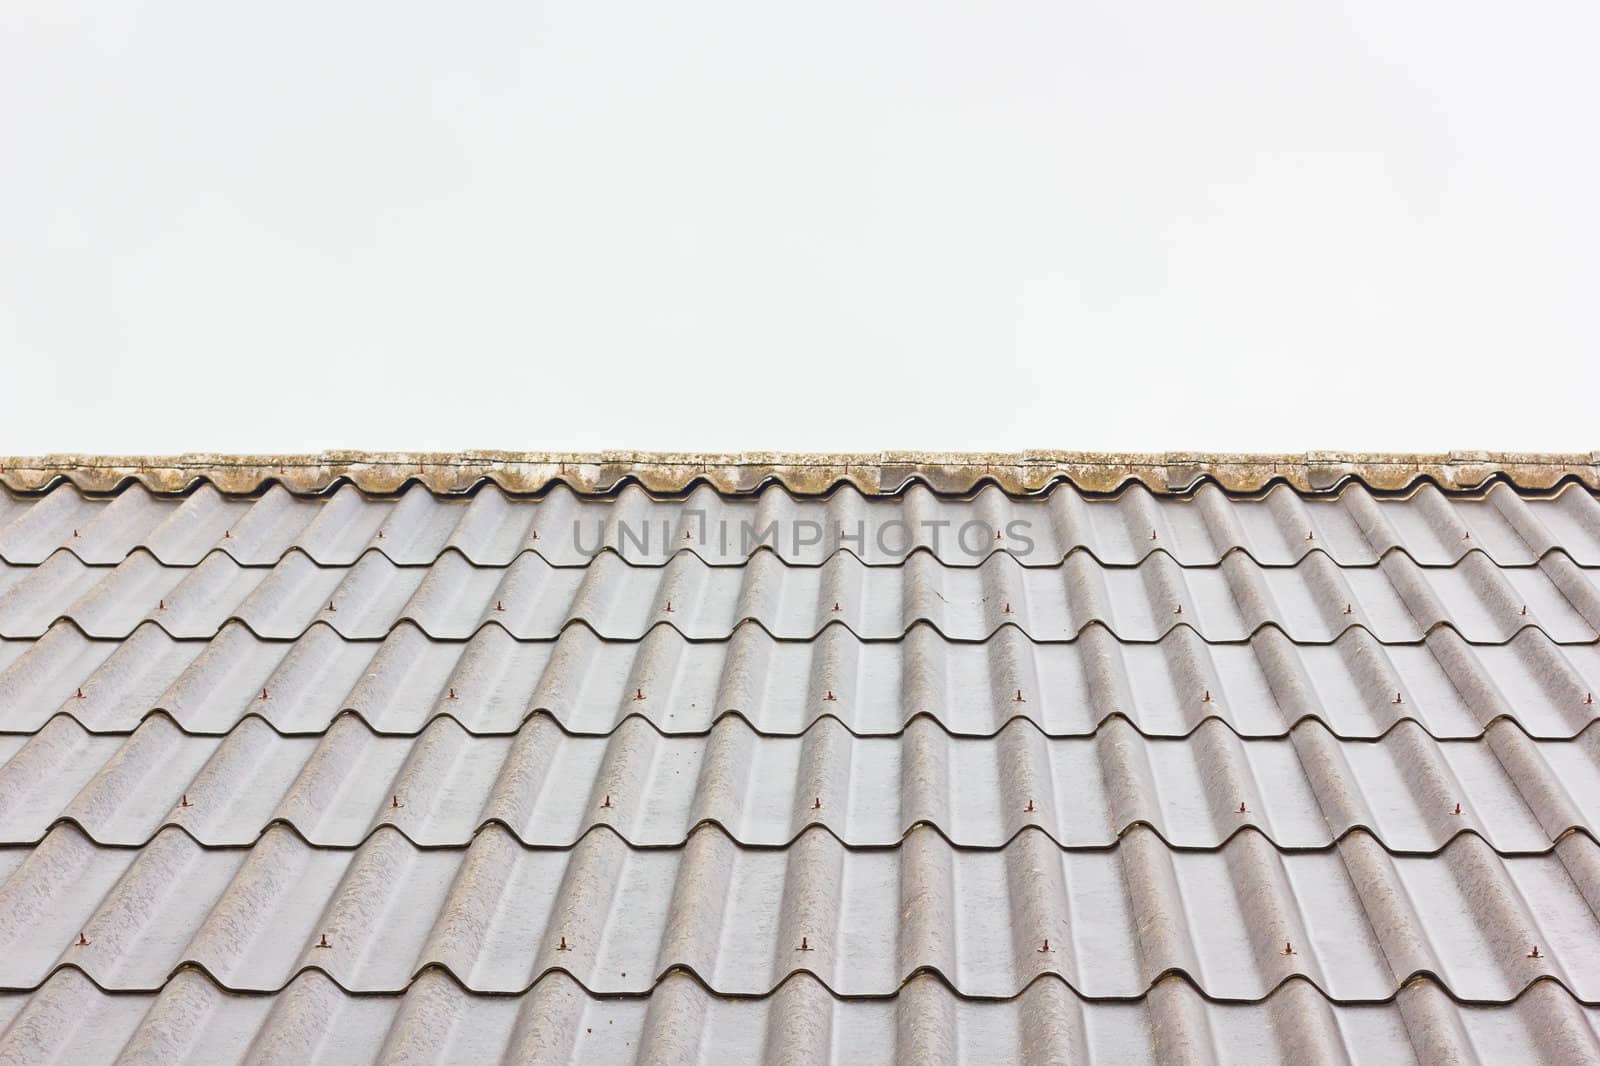 Tile roof by goodmaker